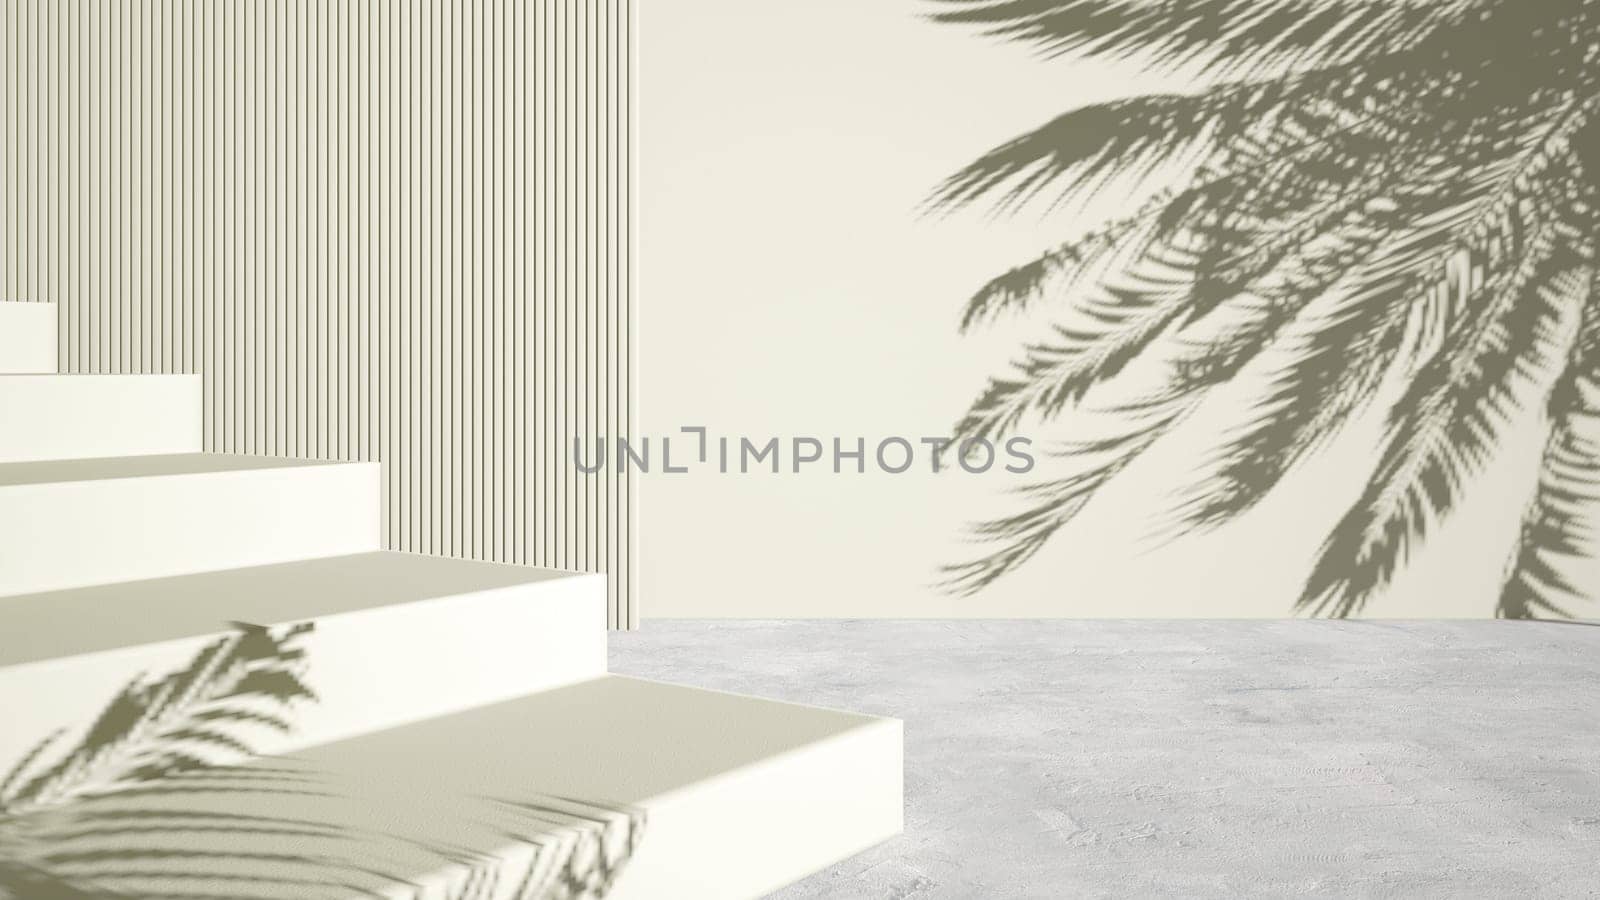 Studio background for product presentation. Empty room with sunlight and shadow of leaves on the wall. Podium for advertising cosmetics and other products. 3d rendering